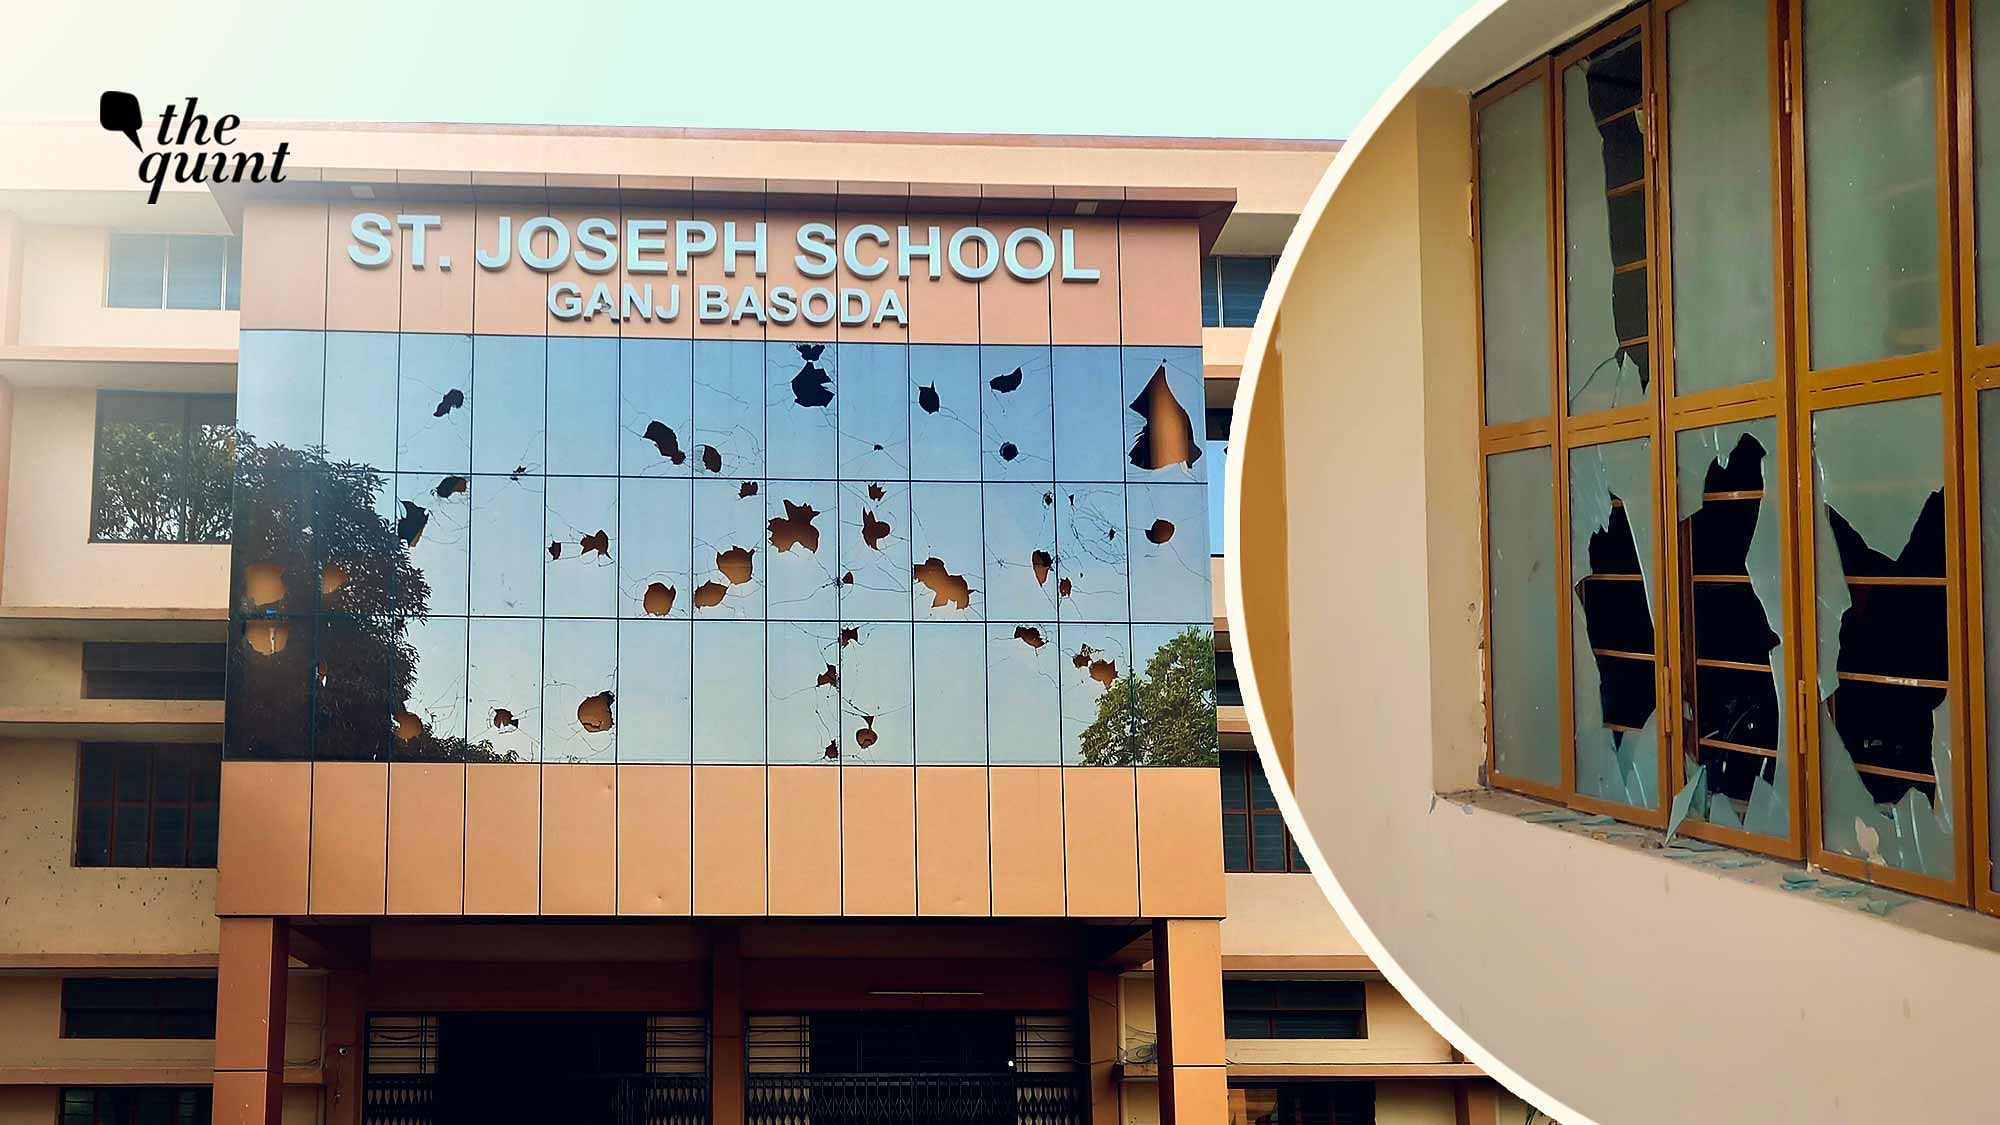 <div class="paragraphs"><p>On 6 December, members of the Hindutva groups pelted stones, raised slogans, and vandalised the building of St Joseph School, alleging that eight Hindu children were converted into Christianity on 8 December by the school authorities.</p></div>